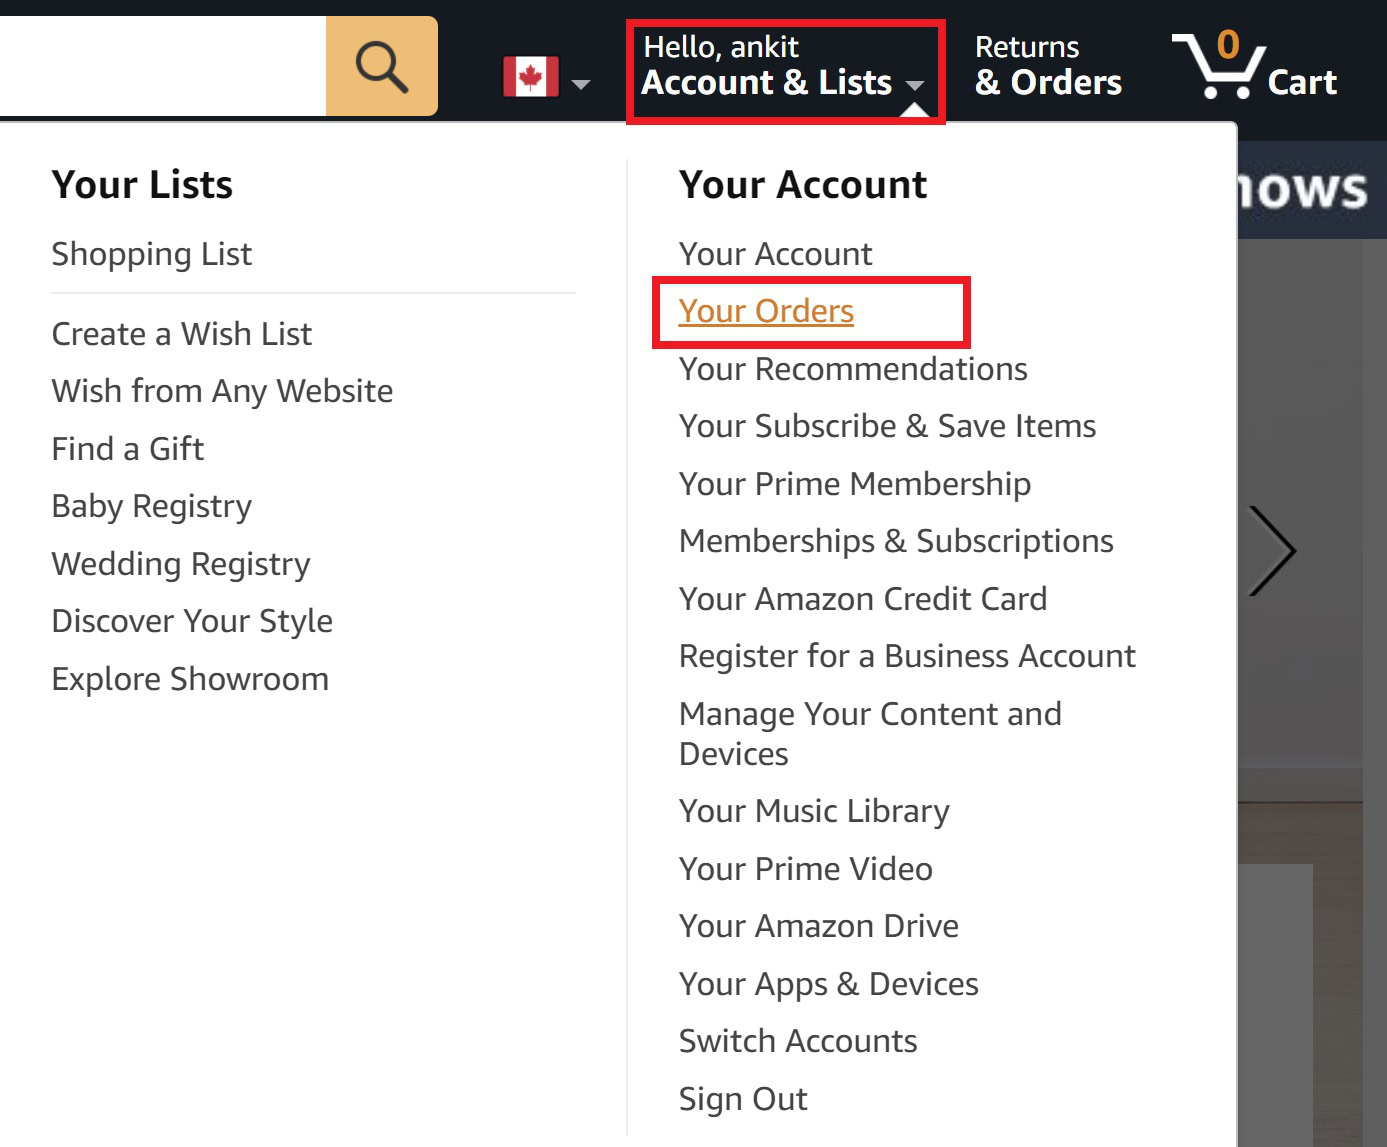 https://www.androidauthority.com/wp-content/uploads/2022/08/amazon-how-to-open-your-orders-1.jpg